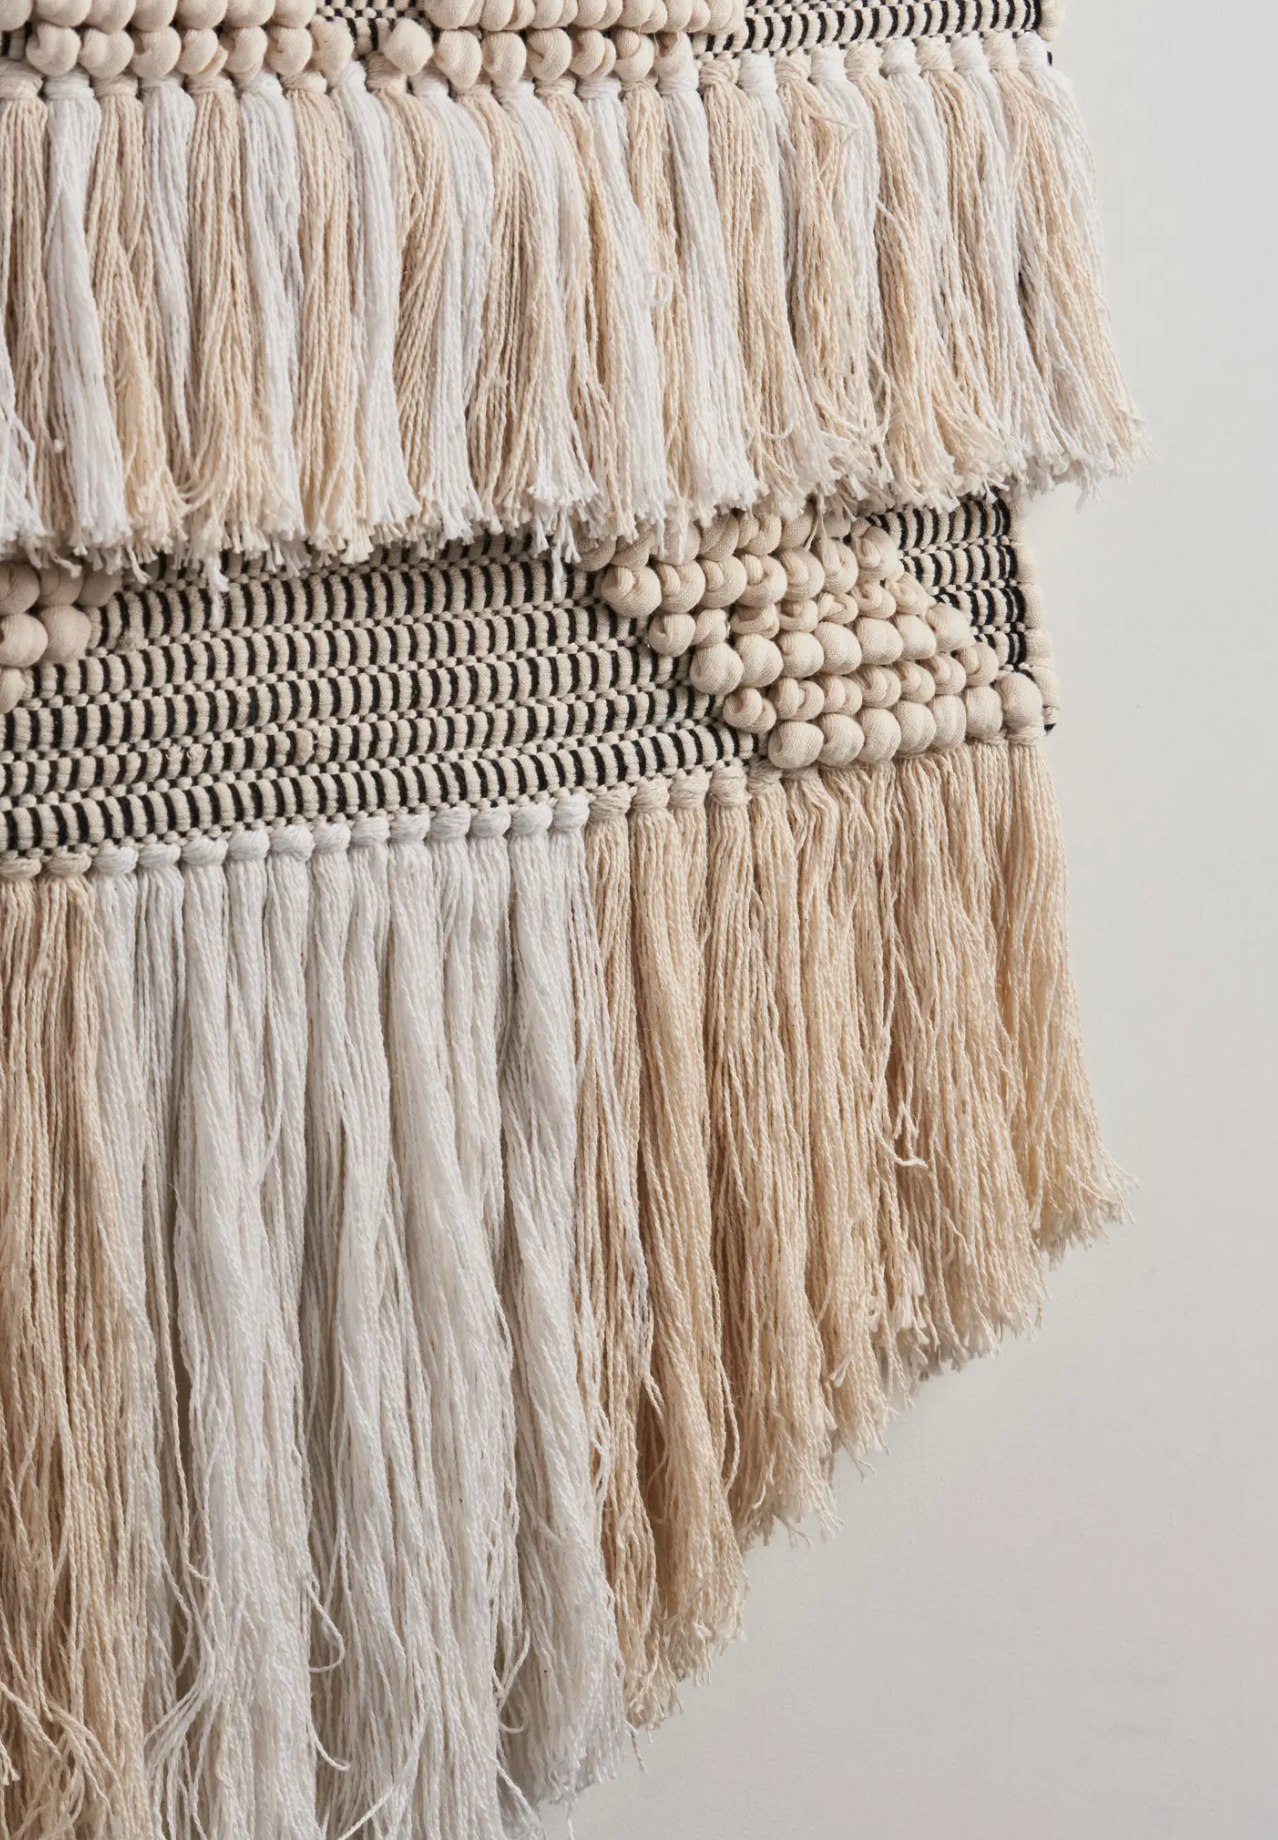 Diamond Tufted and Fringed Wall Hanging